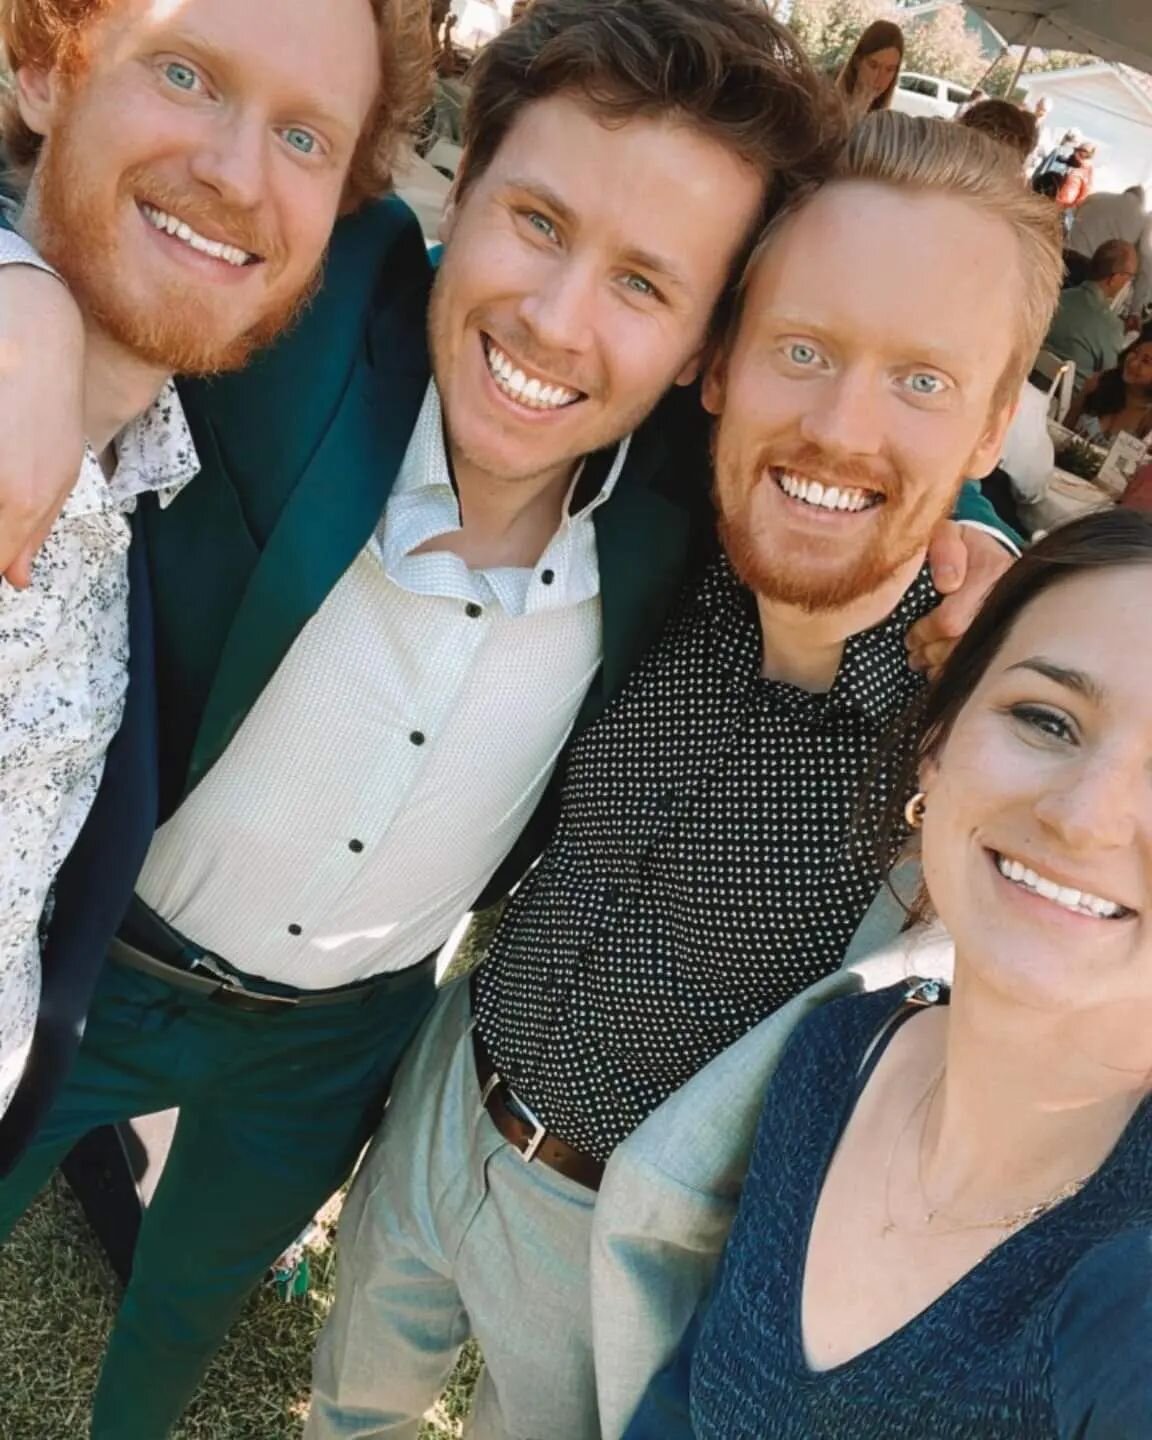 Look at these adorable faces from our wedding gig last week! ❤️
.
.
.
If you want to see more from this handsome little troupe, they'll be playing as @onthelashbandofficial this coming Wednesday night @blindpig_annarbor 🍀🎶
.
https://www.ticketweb.c